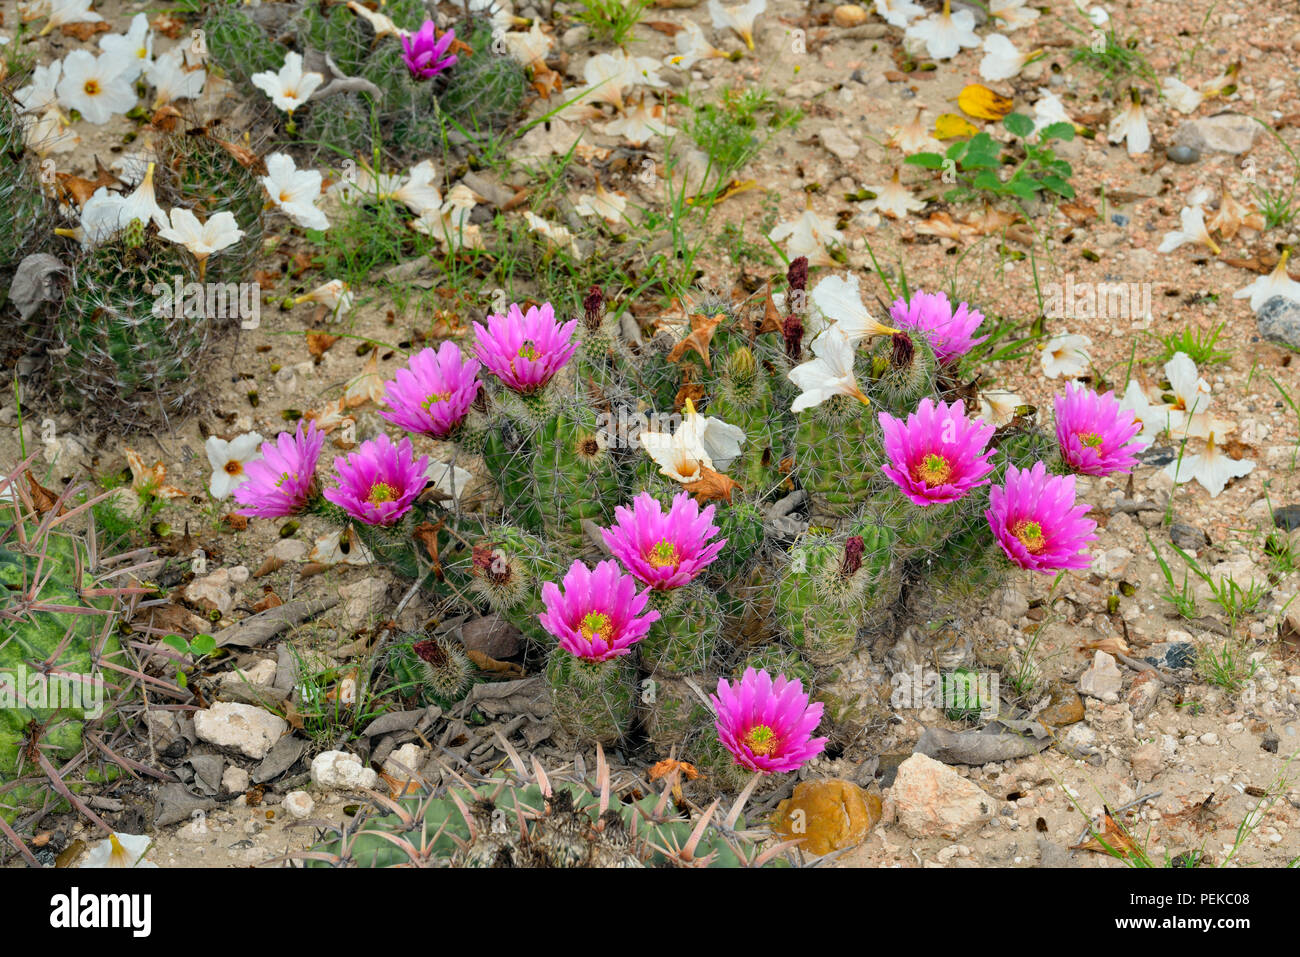 Strawberry Cactus (Mammillaria dioica) and fallen Mexican (wild) olive flowers in a residential garden, Rio Grande City, Texas, USA Stock Photo